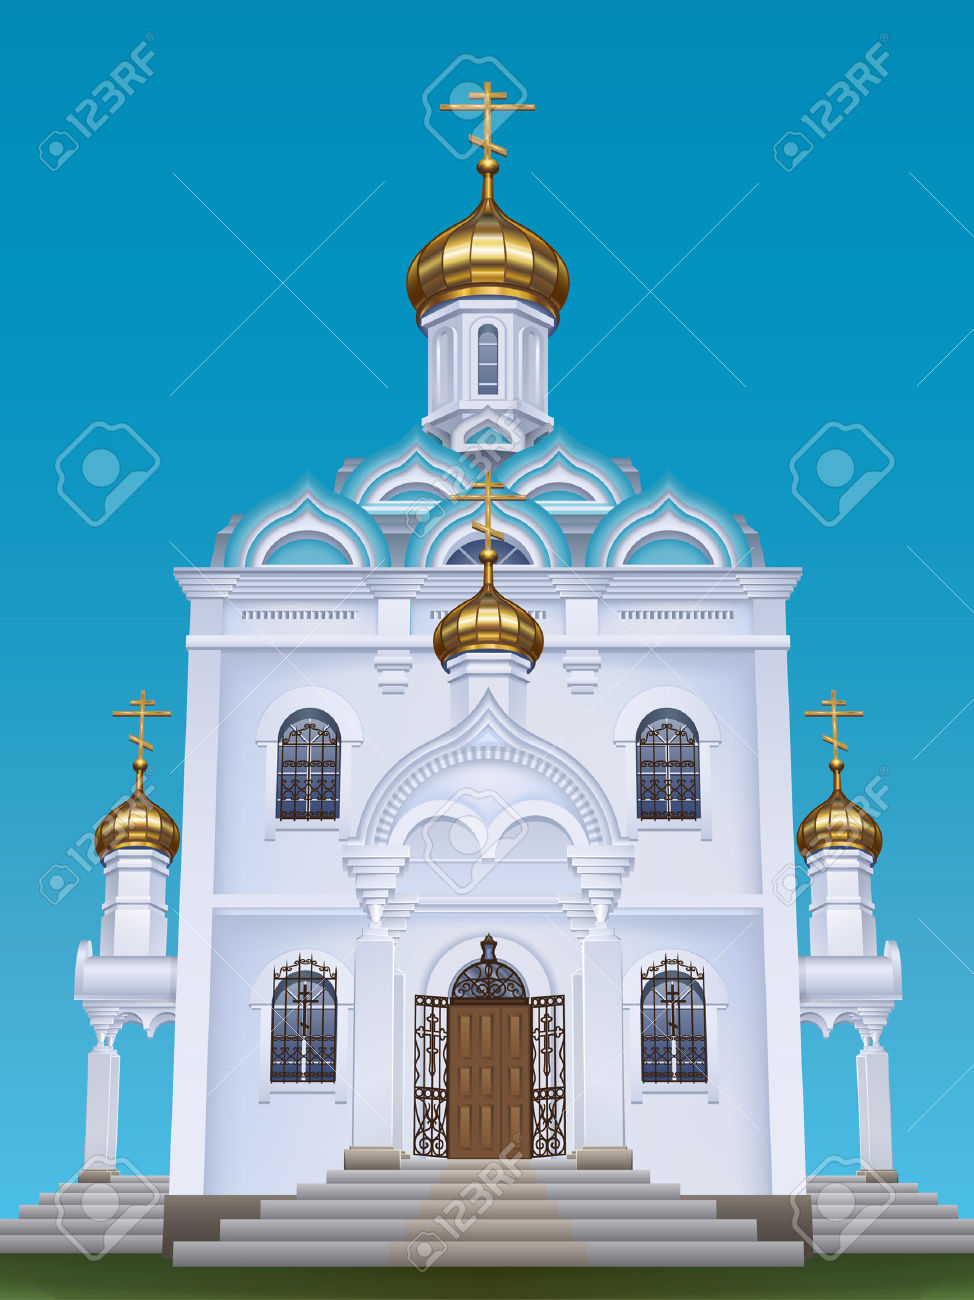 Russian Orthodox Church With Typical Golden Onion Domes Royalty.